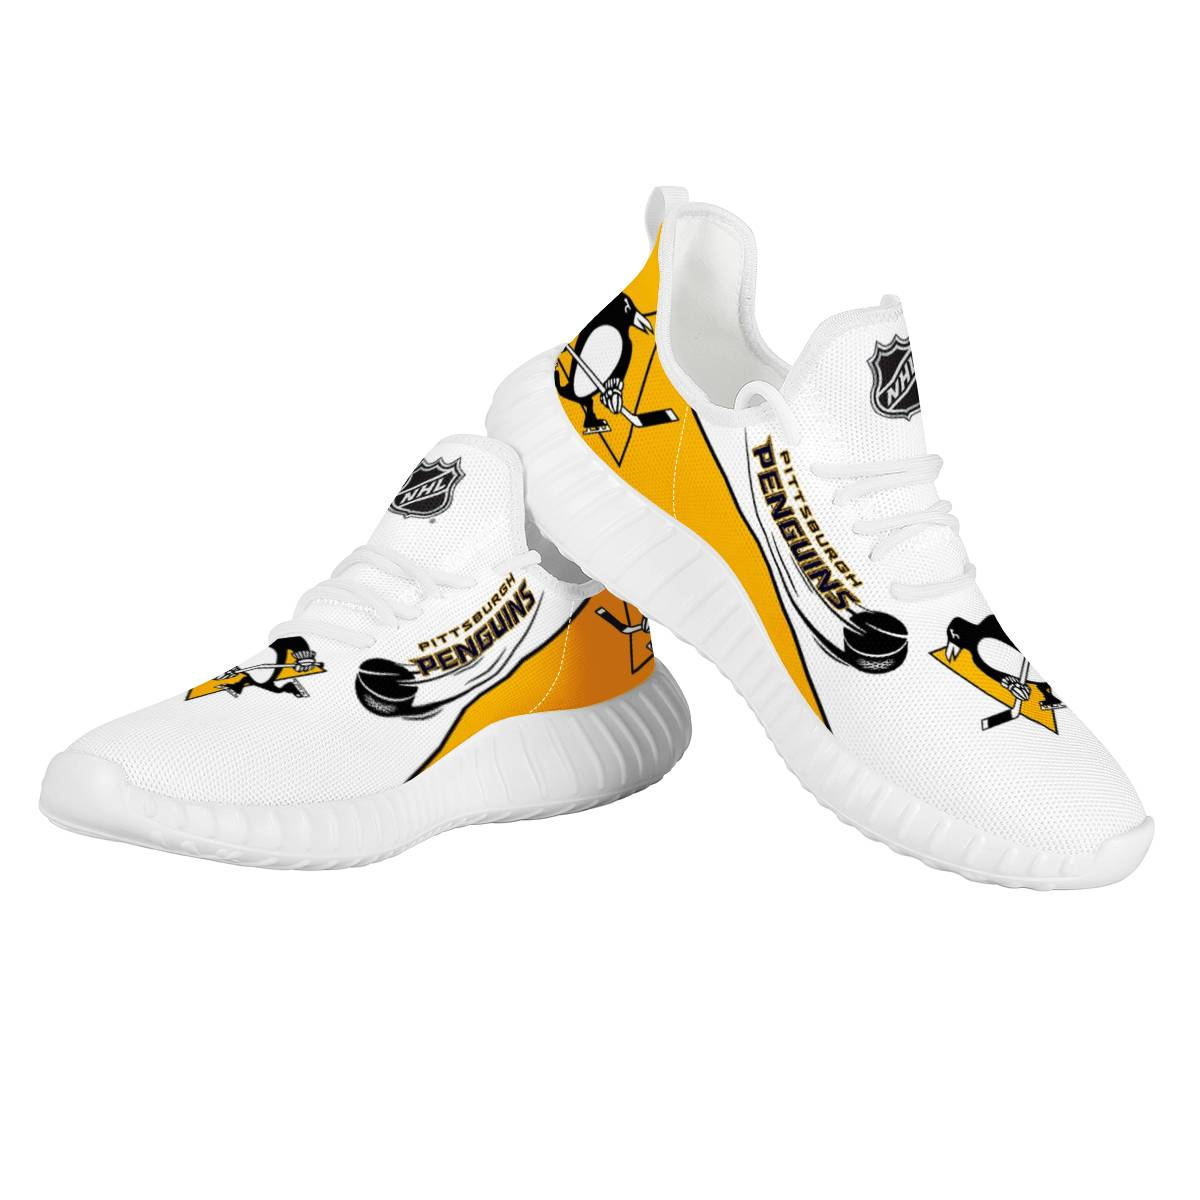 Women's NHL Pittsburgh Penguins Mesh Knit Sneakers/Shoes 002